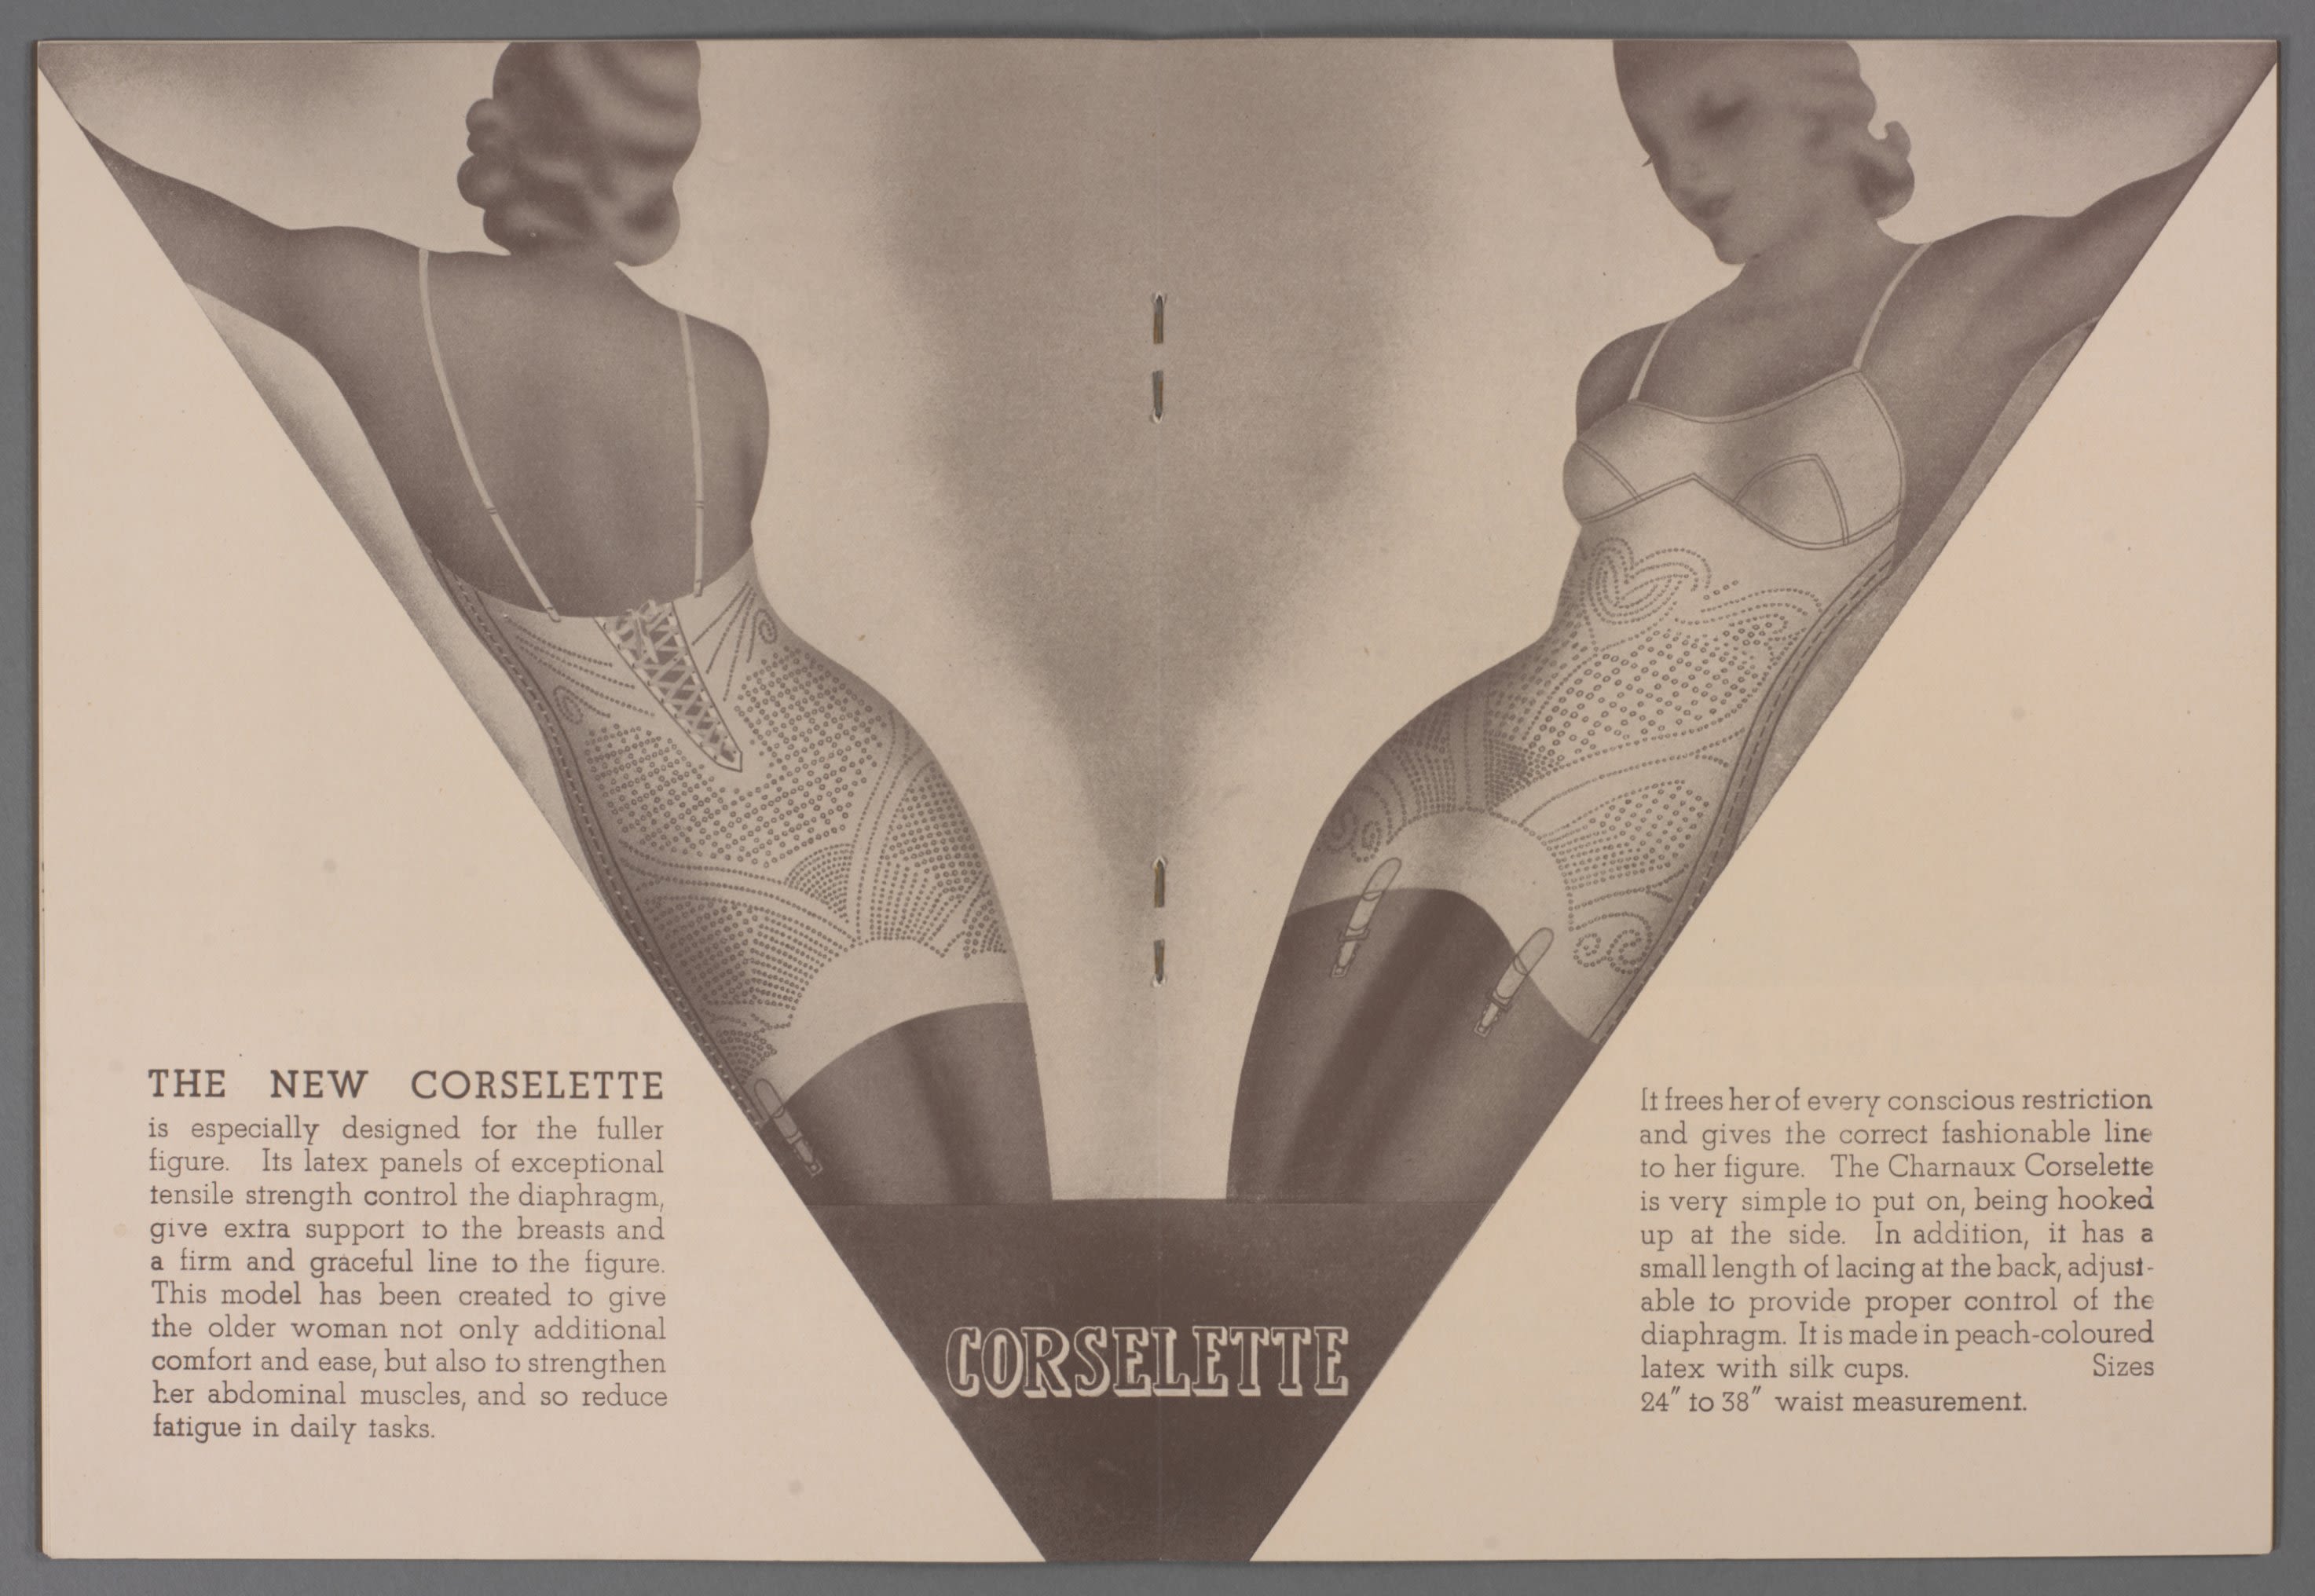 Sex, gender and morality: The unseen history of underwear